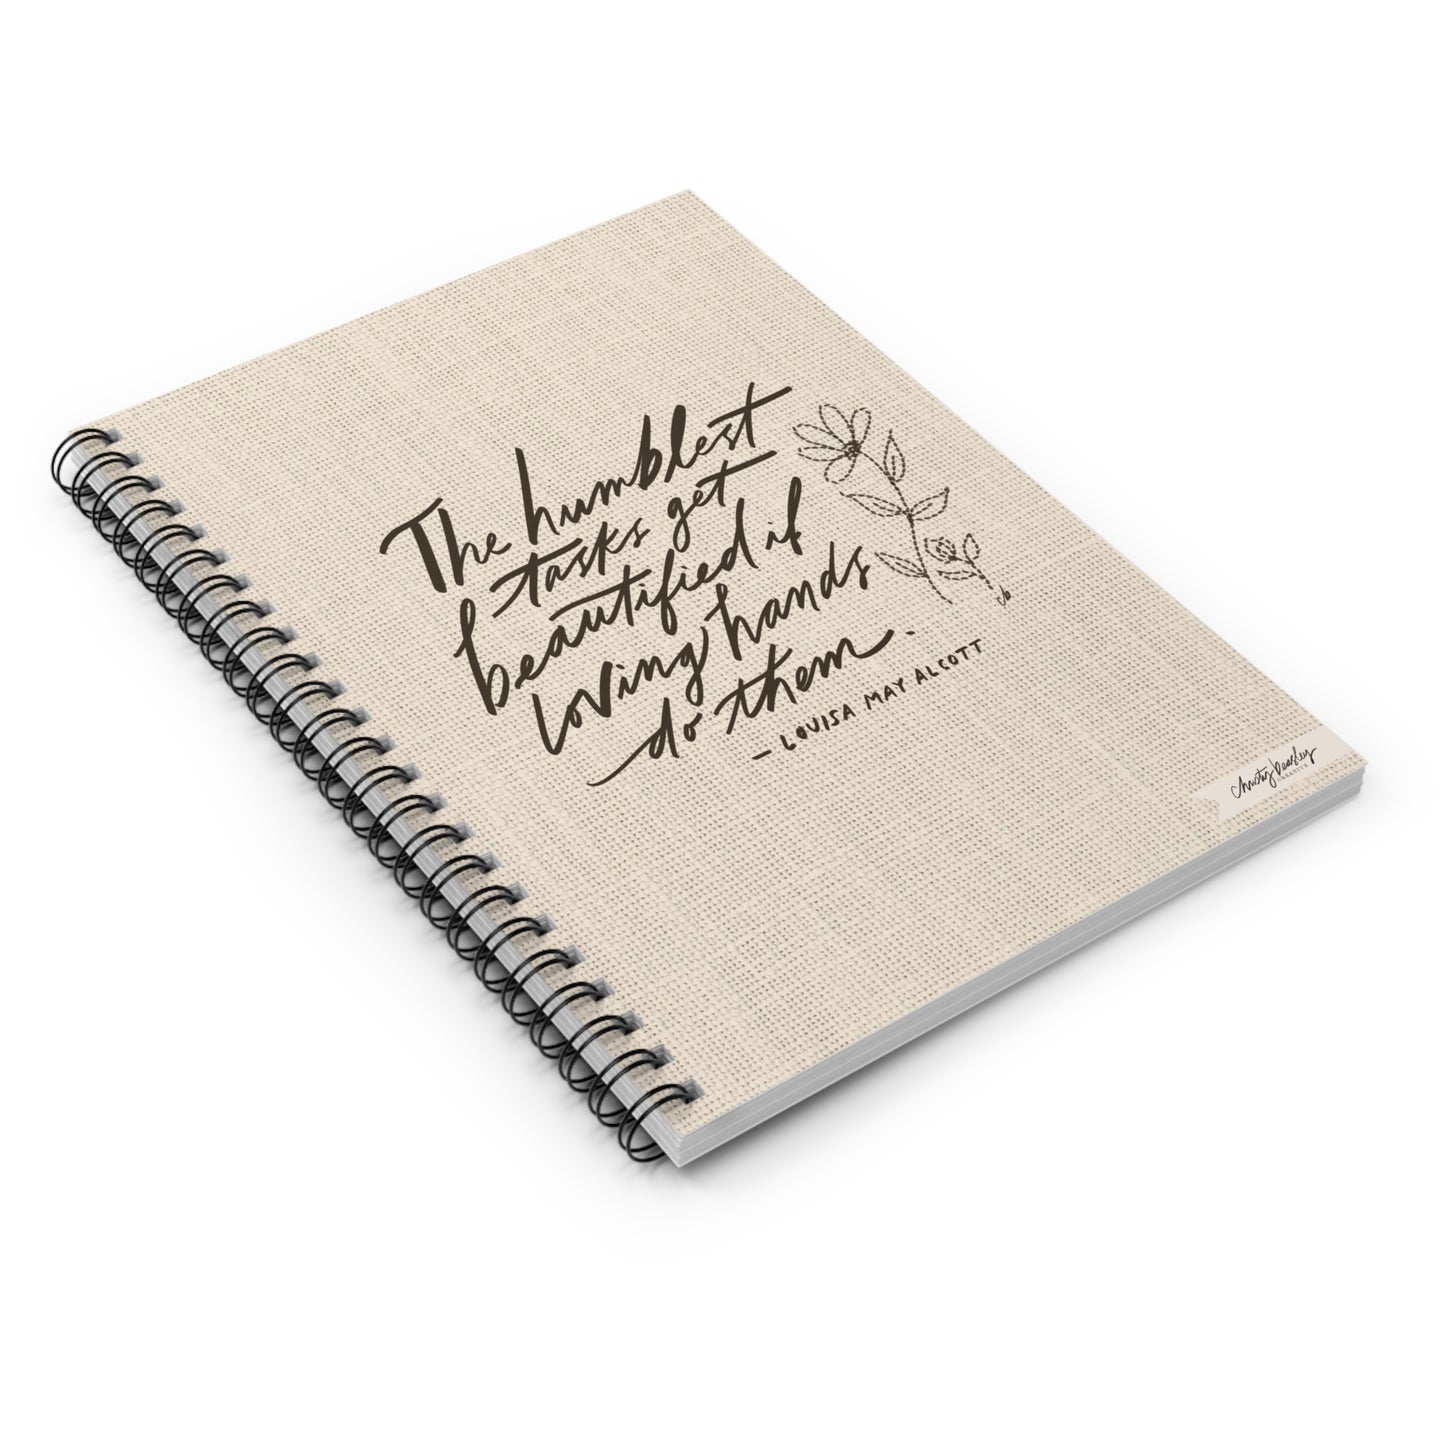 “The Humblest Tasks” Quote Spiral Notebook - Ruled Line - by Christy Beasley